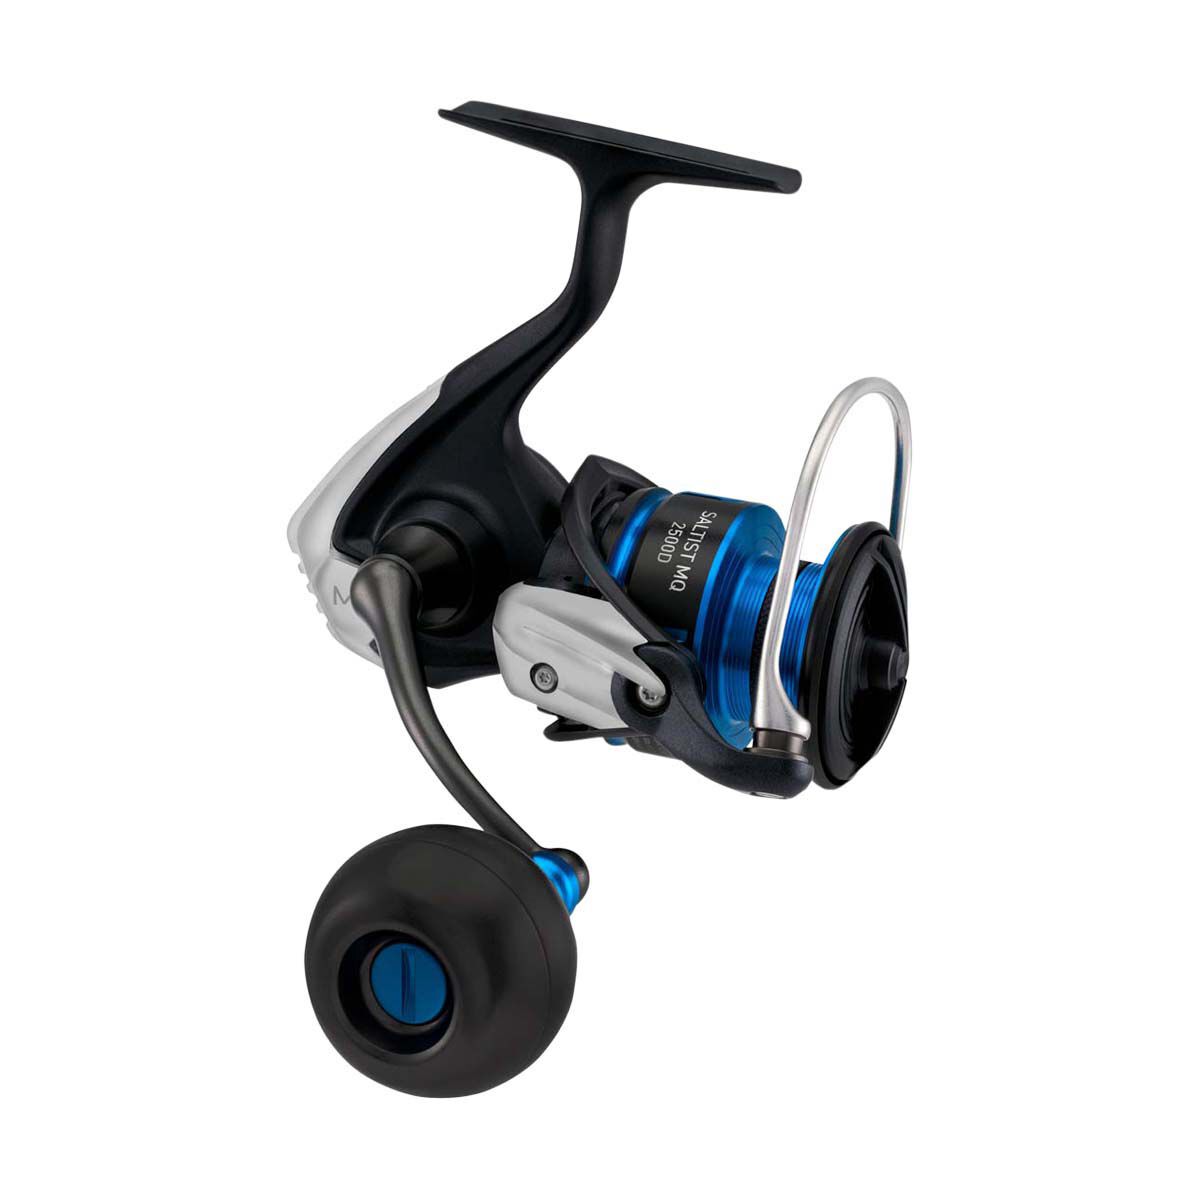 All new Ugly Tuff Spinning Reel - available exclusively through BCF stores